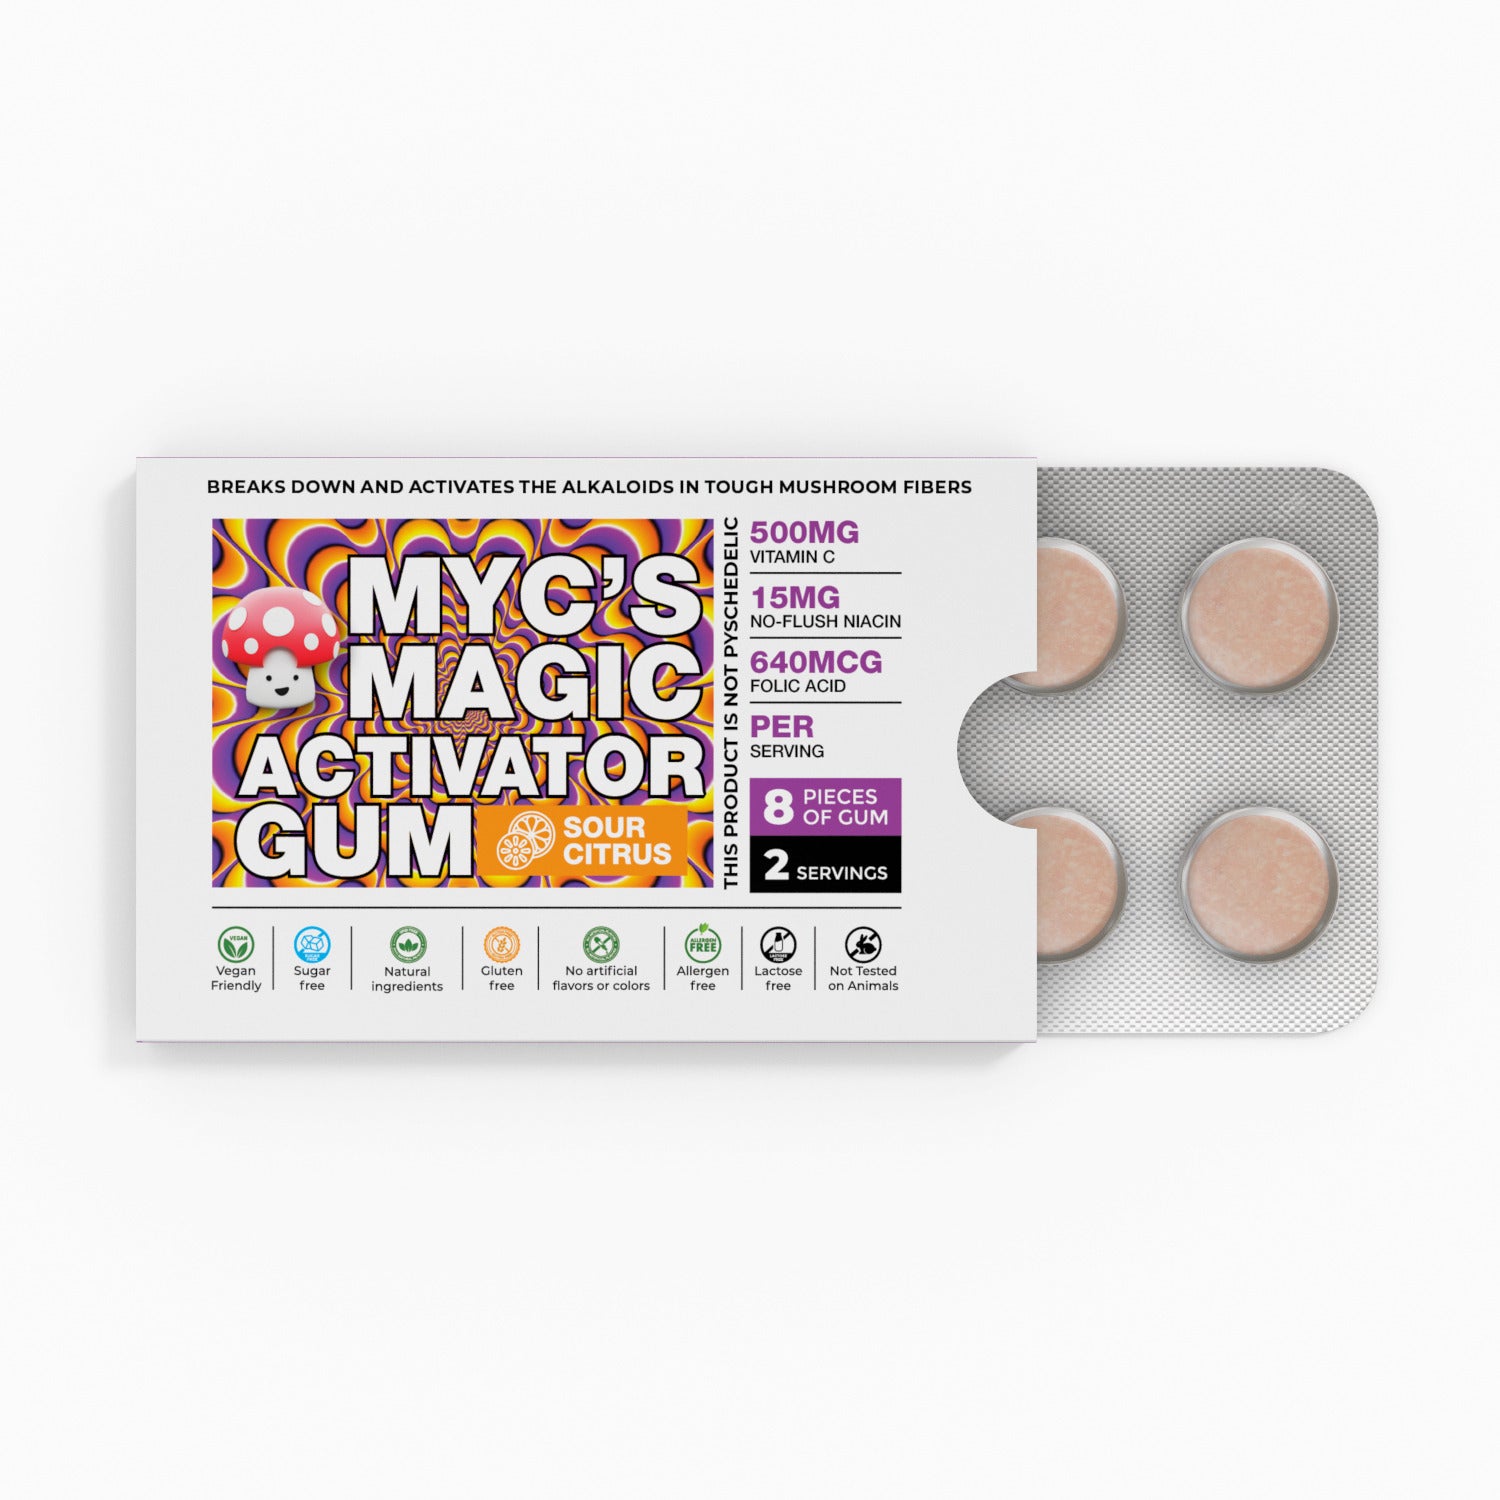 Myc’s Sour Activator Gum. Needed to complete the “Nootropic Stack.” Extends effects & lowers GI issues.